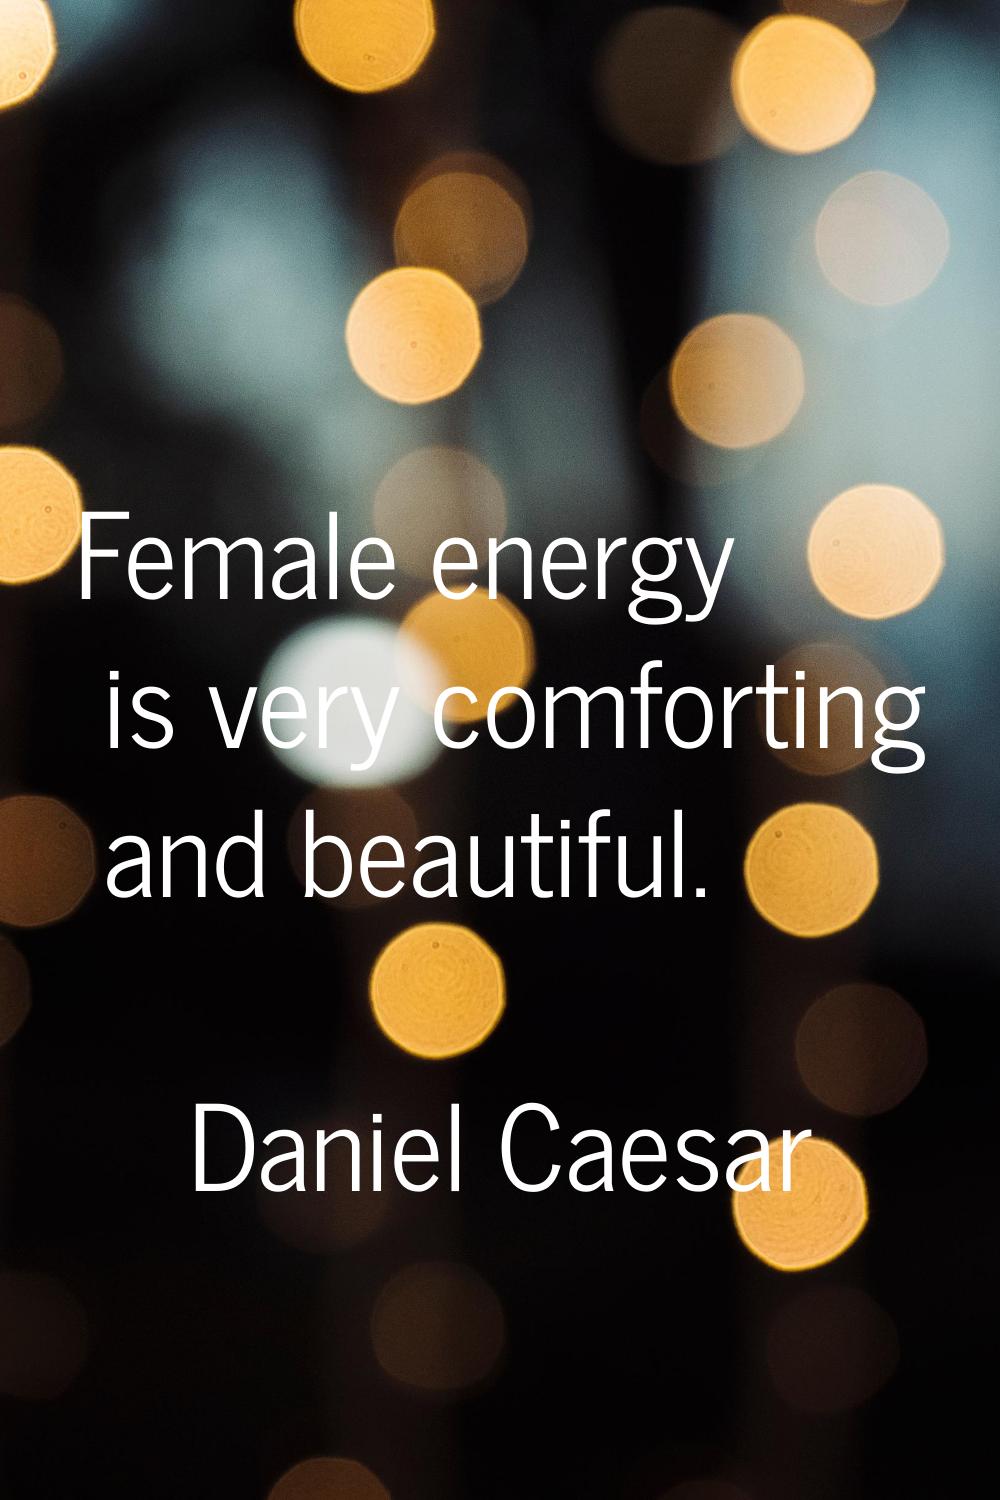 Female energy is very comforting and beautiful.